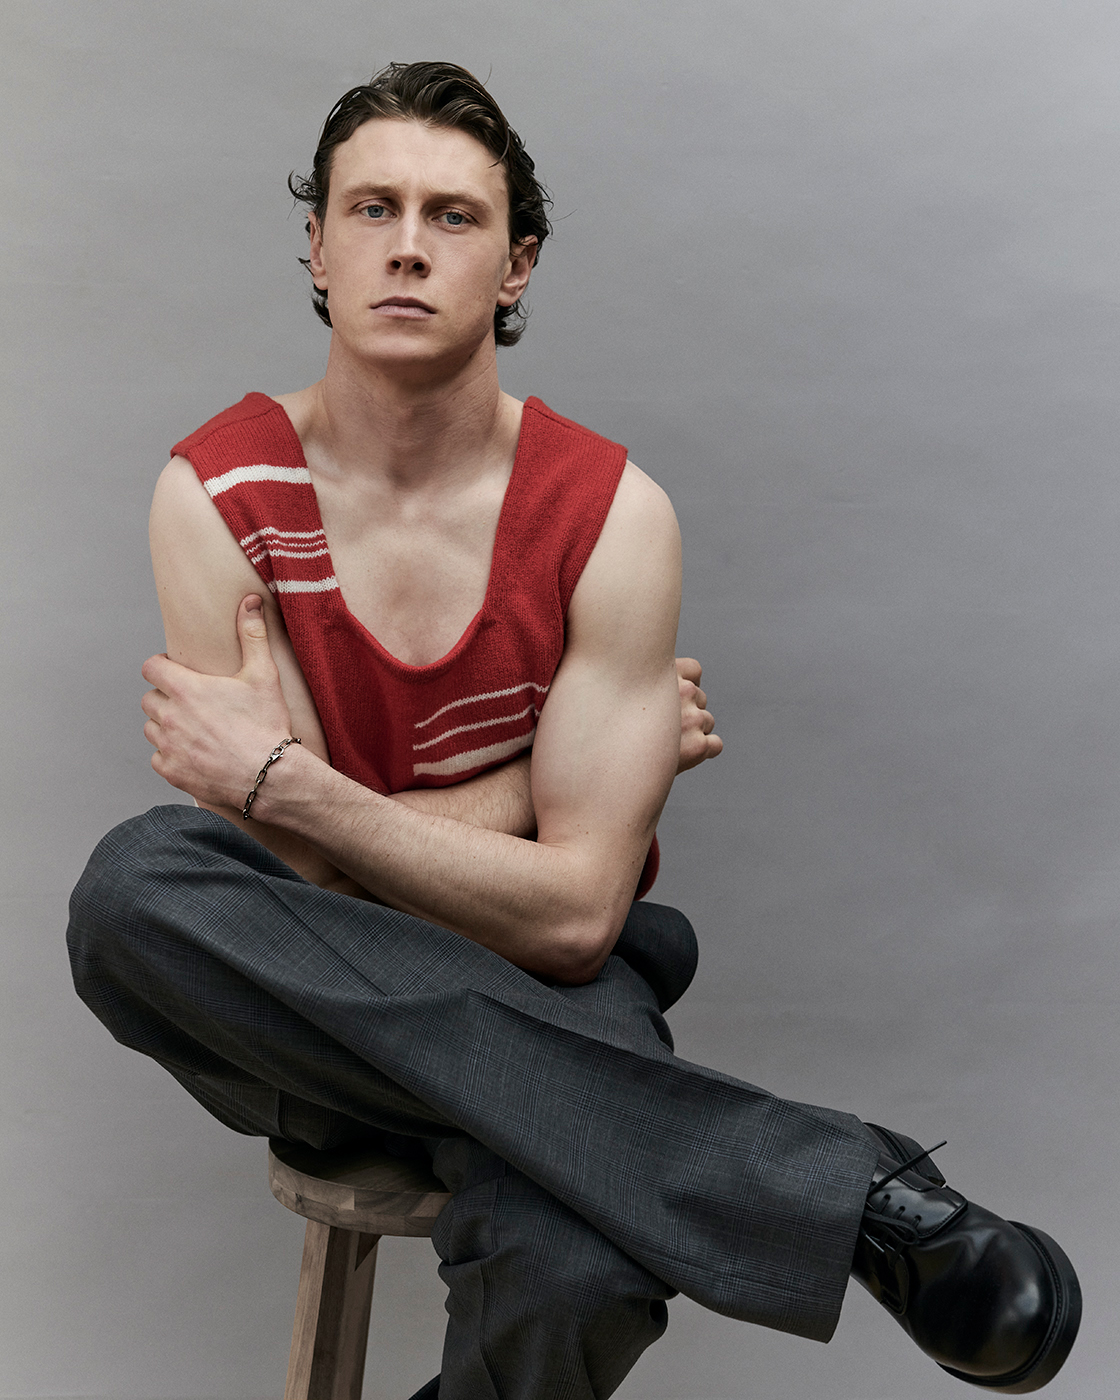 George MacKay - Behind the Blinds Photoshoot - 2022